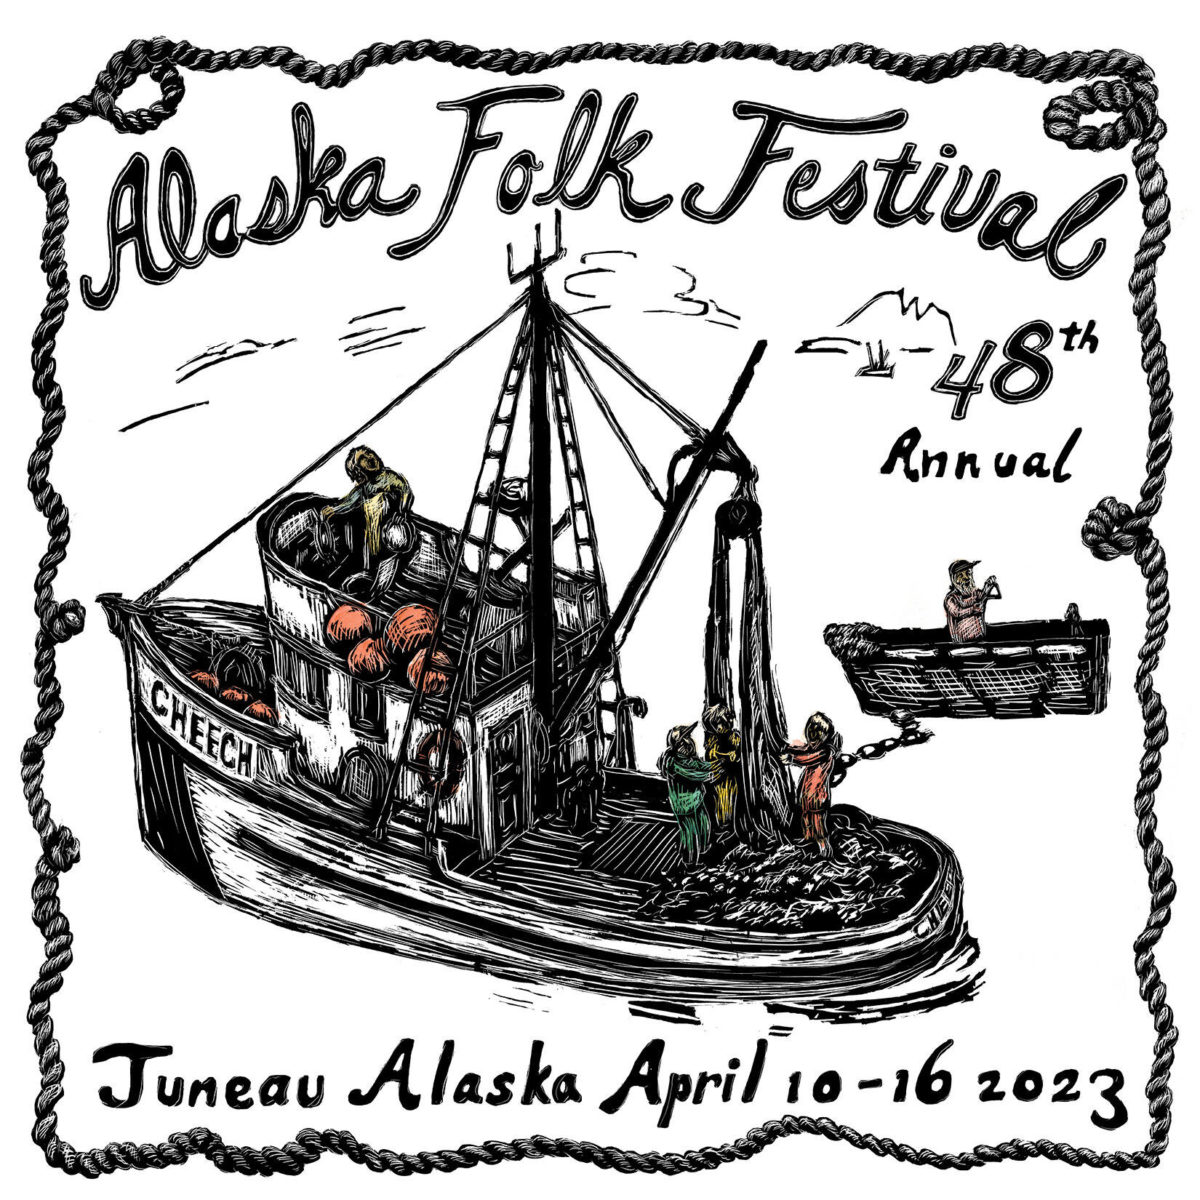 Alaska Folk Fest returns soon —but there’s still time to apply to